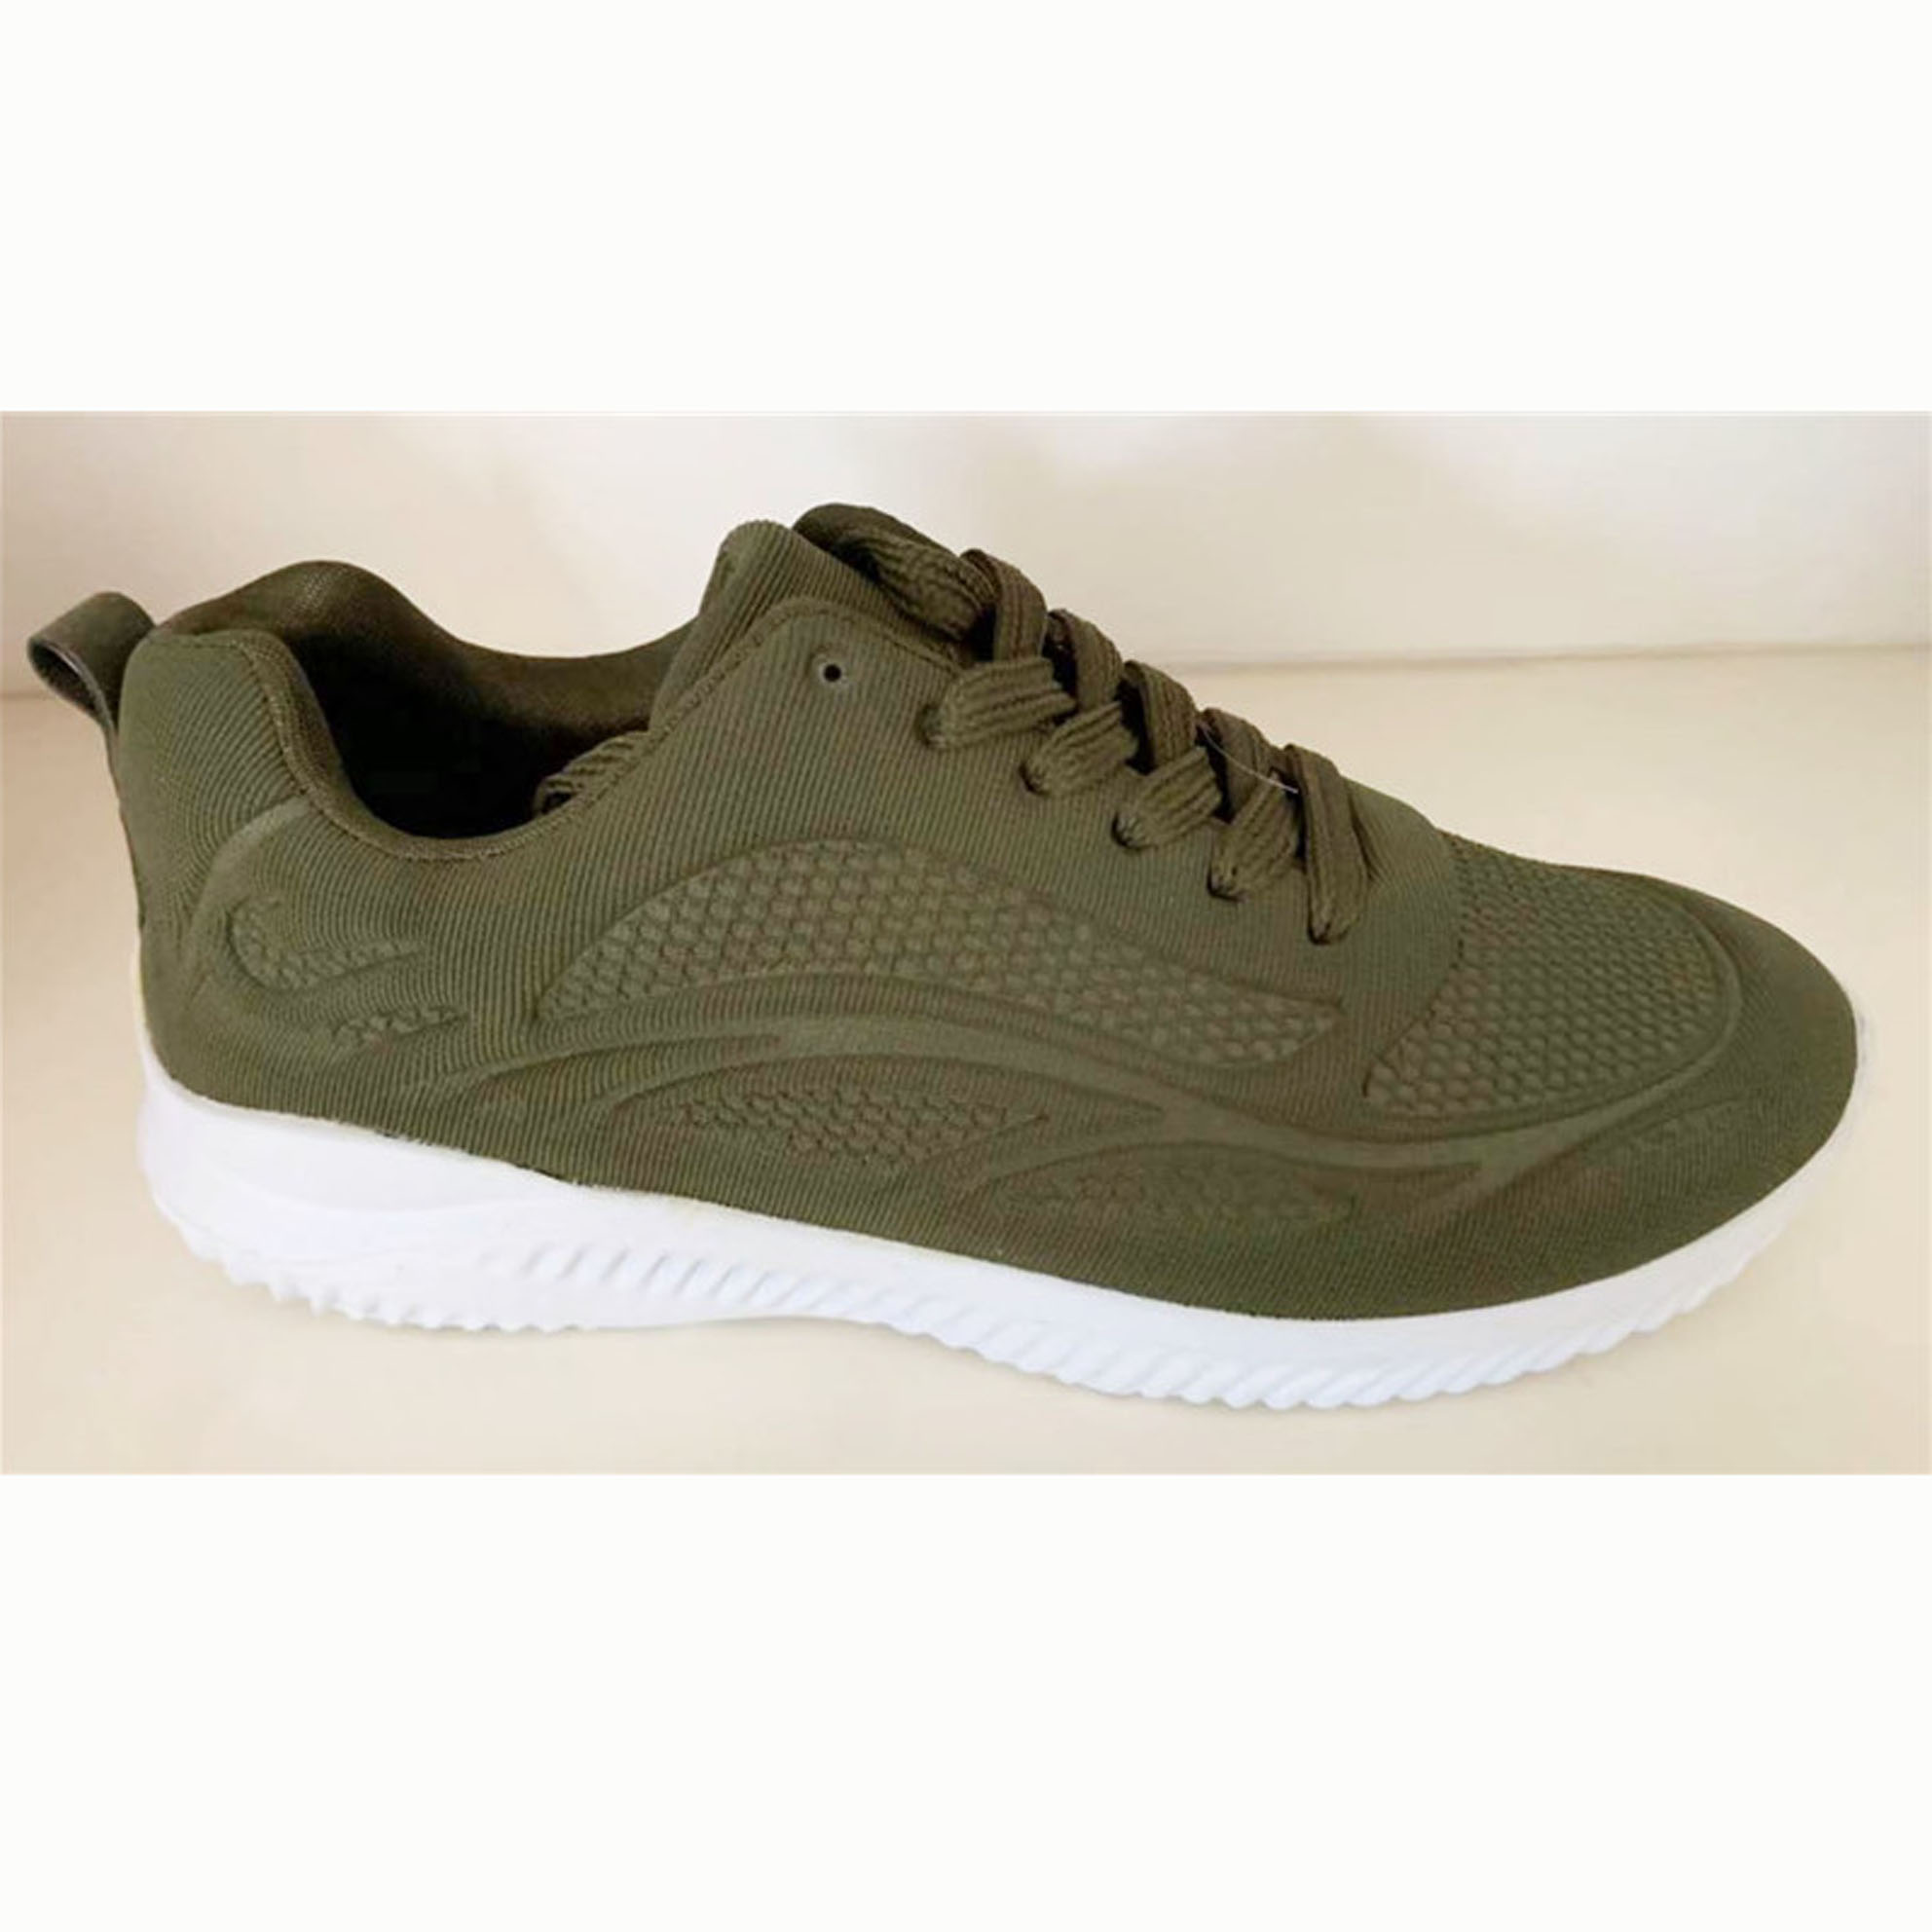 High quality fashion men casual shoes sport shoes sneaker shoes...